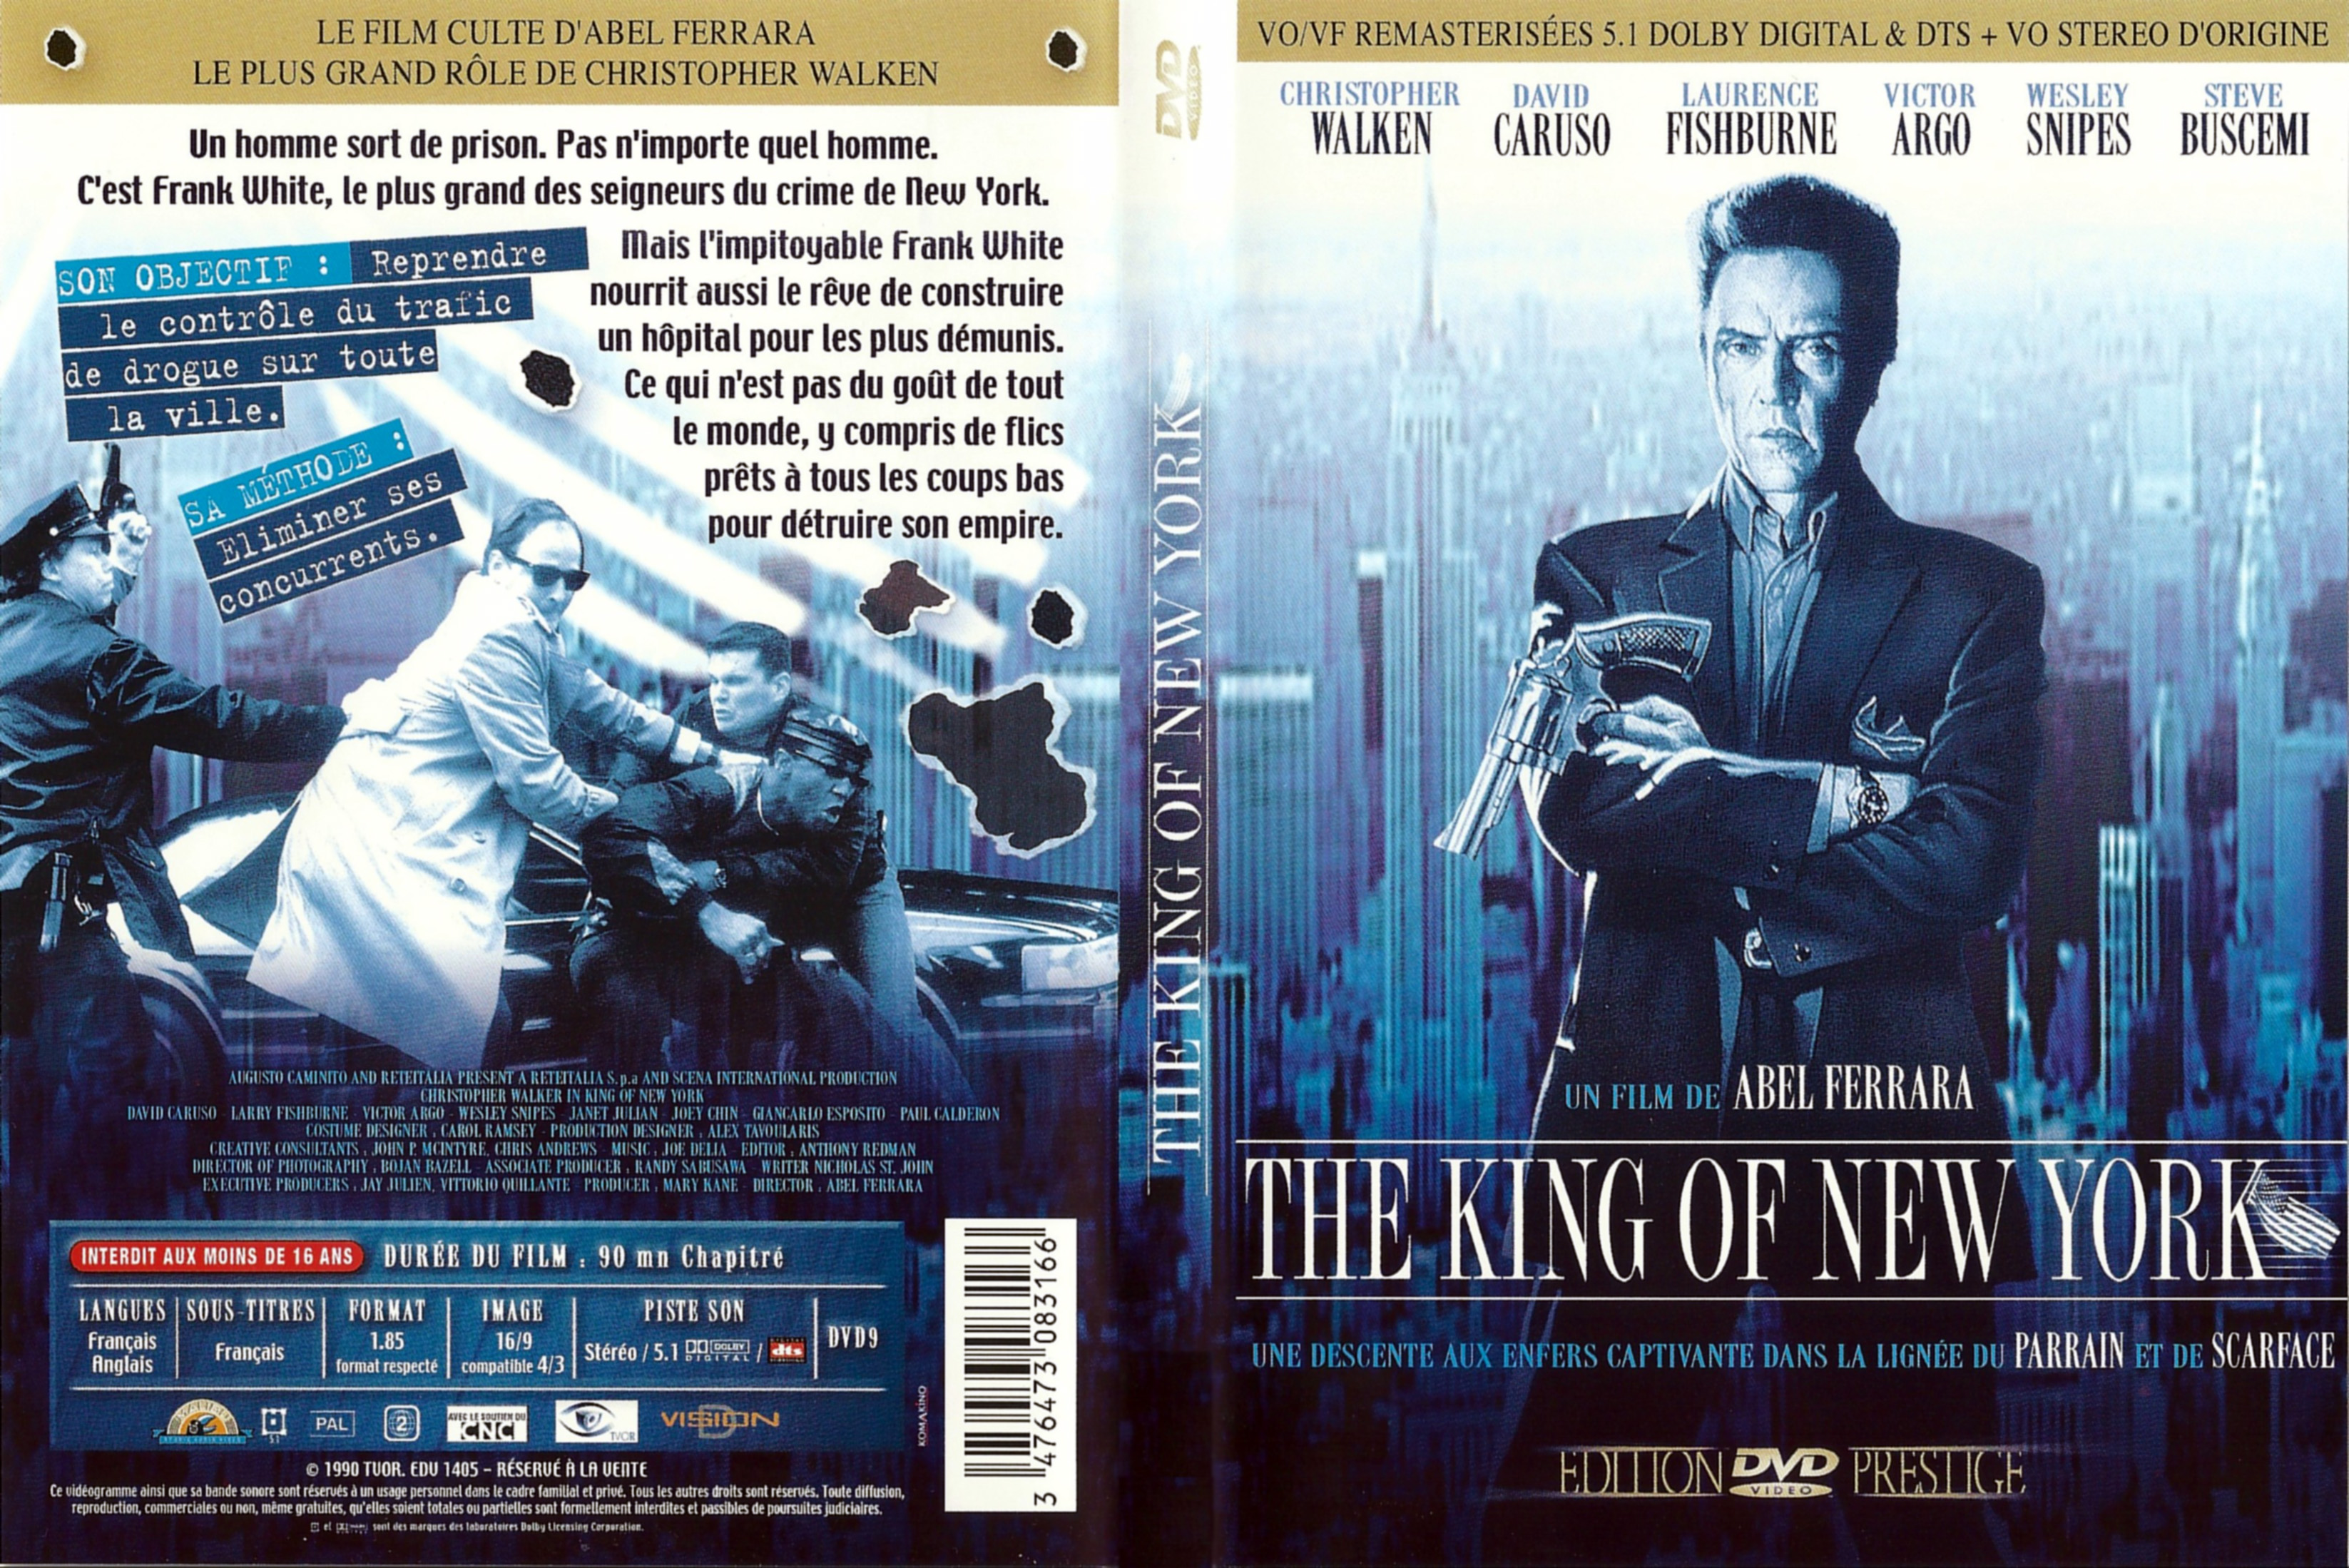 Jaquette DVD The King of New York